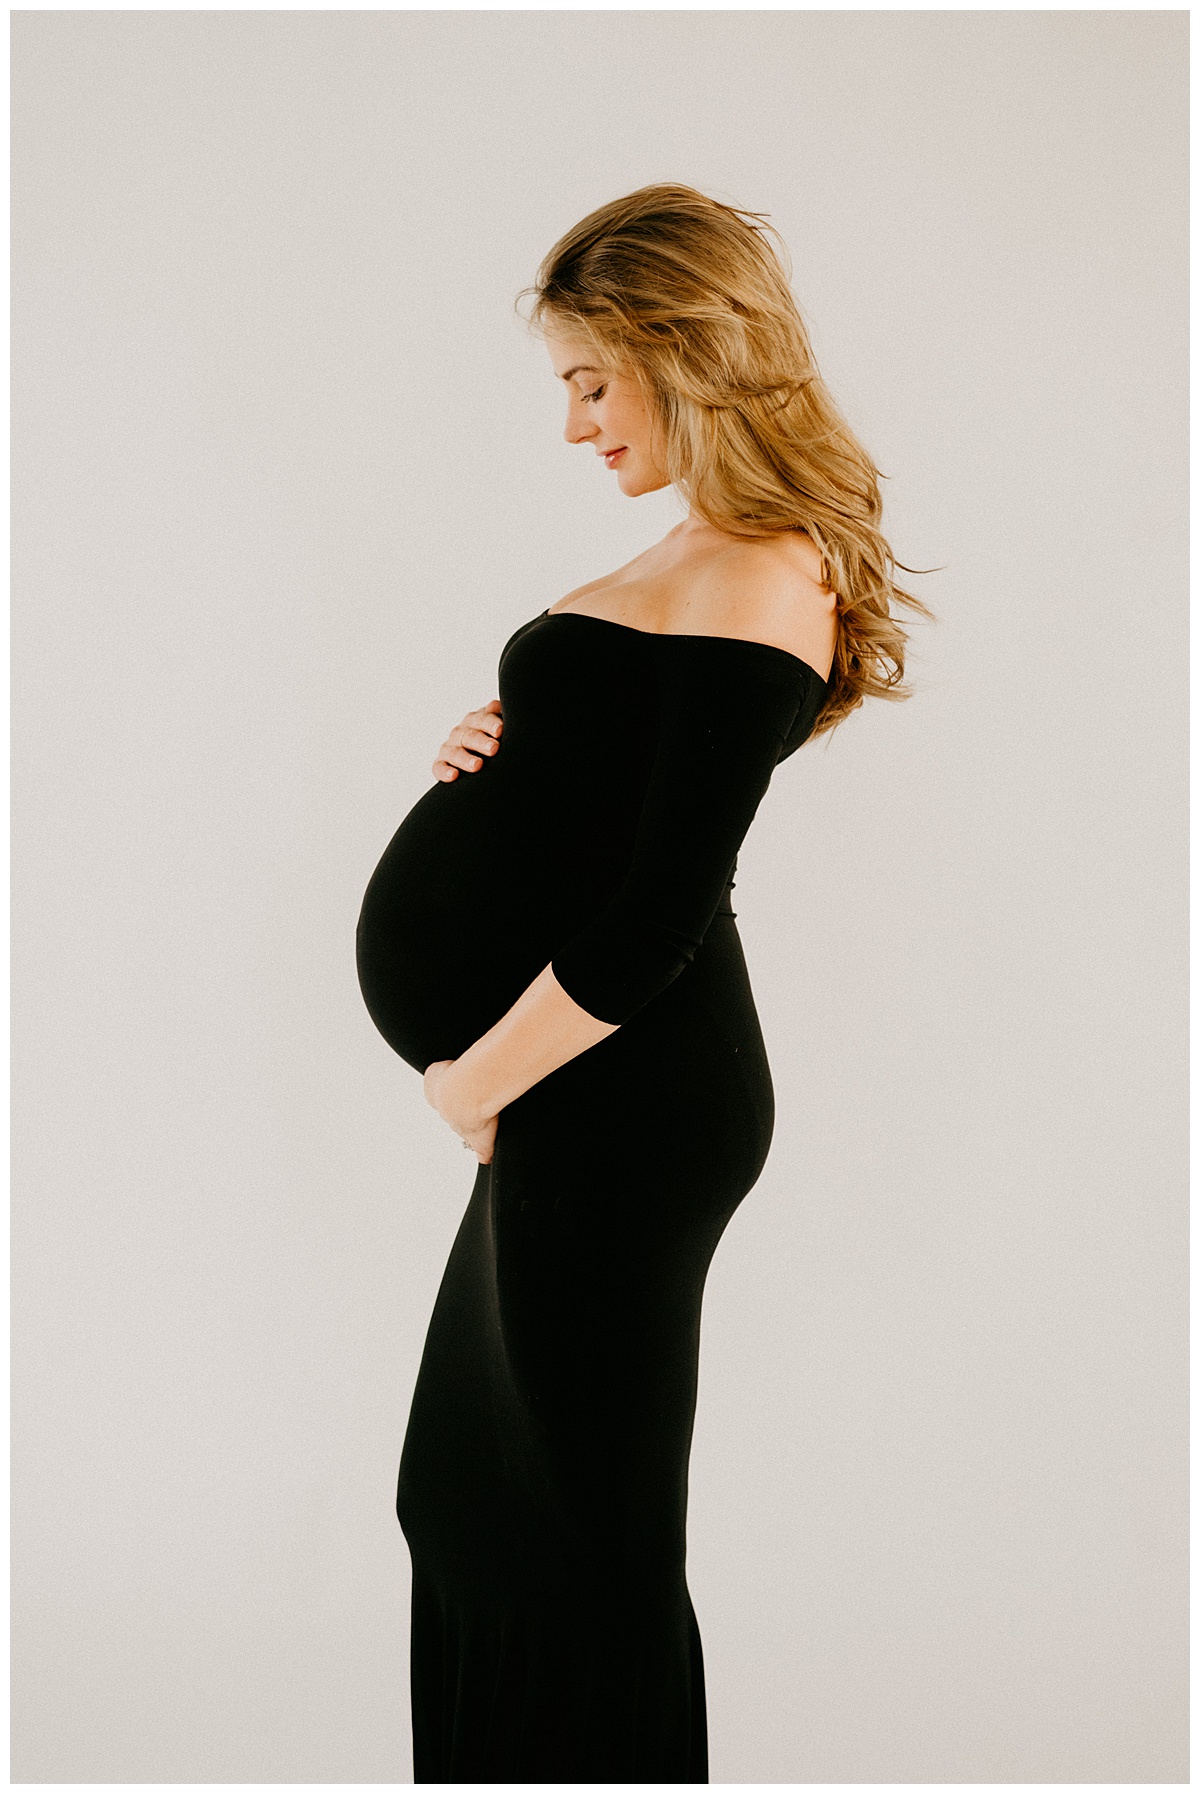 What to Wear for a Studio Maternity Photoshoot? - Studio 29